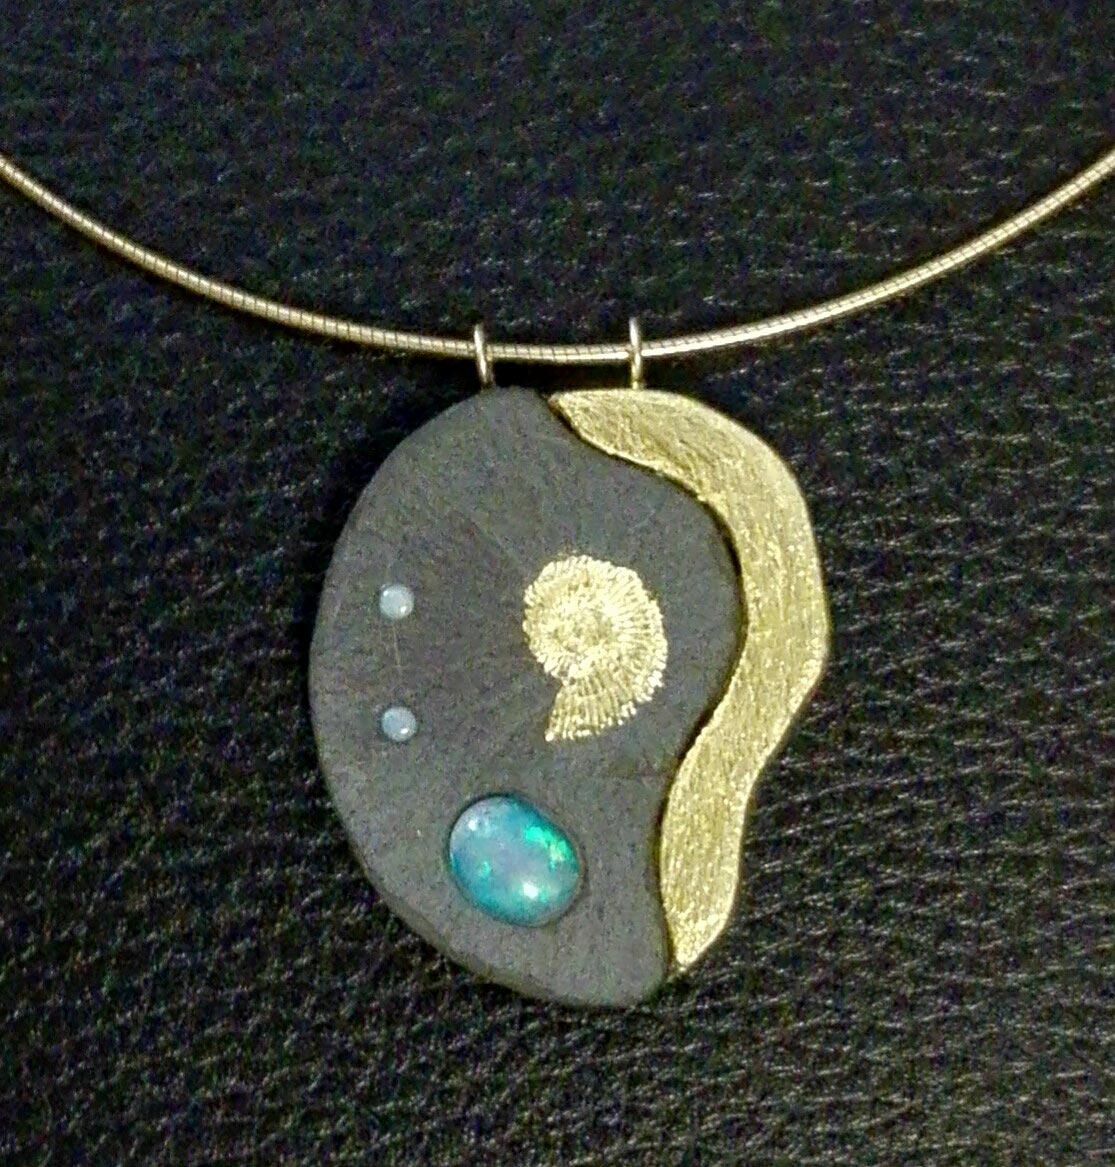 Necklace with Pendant